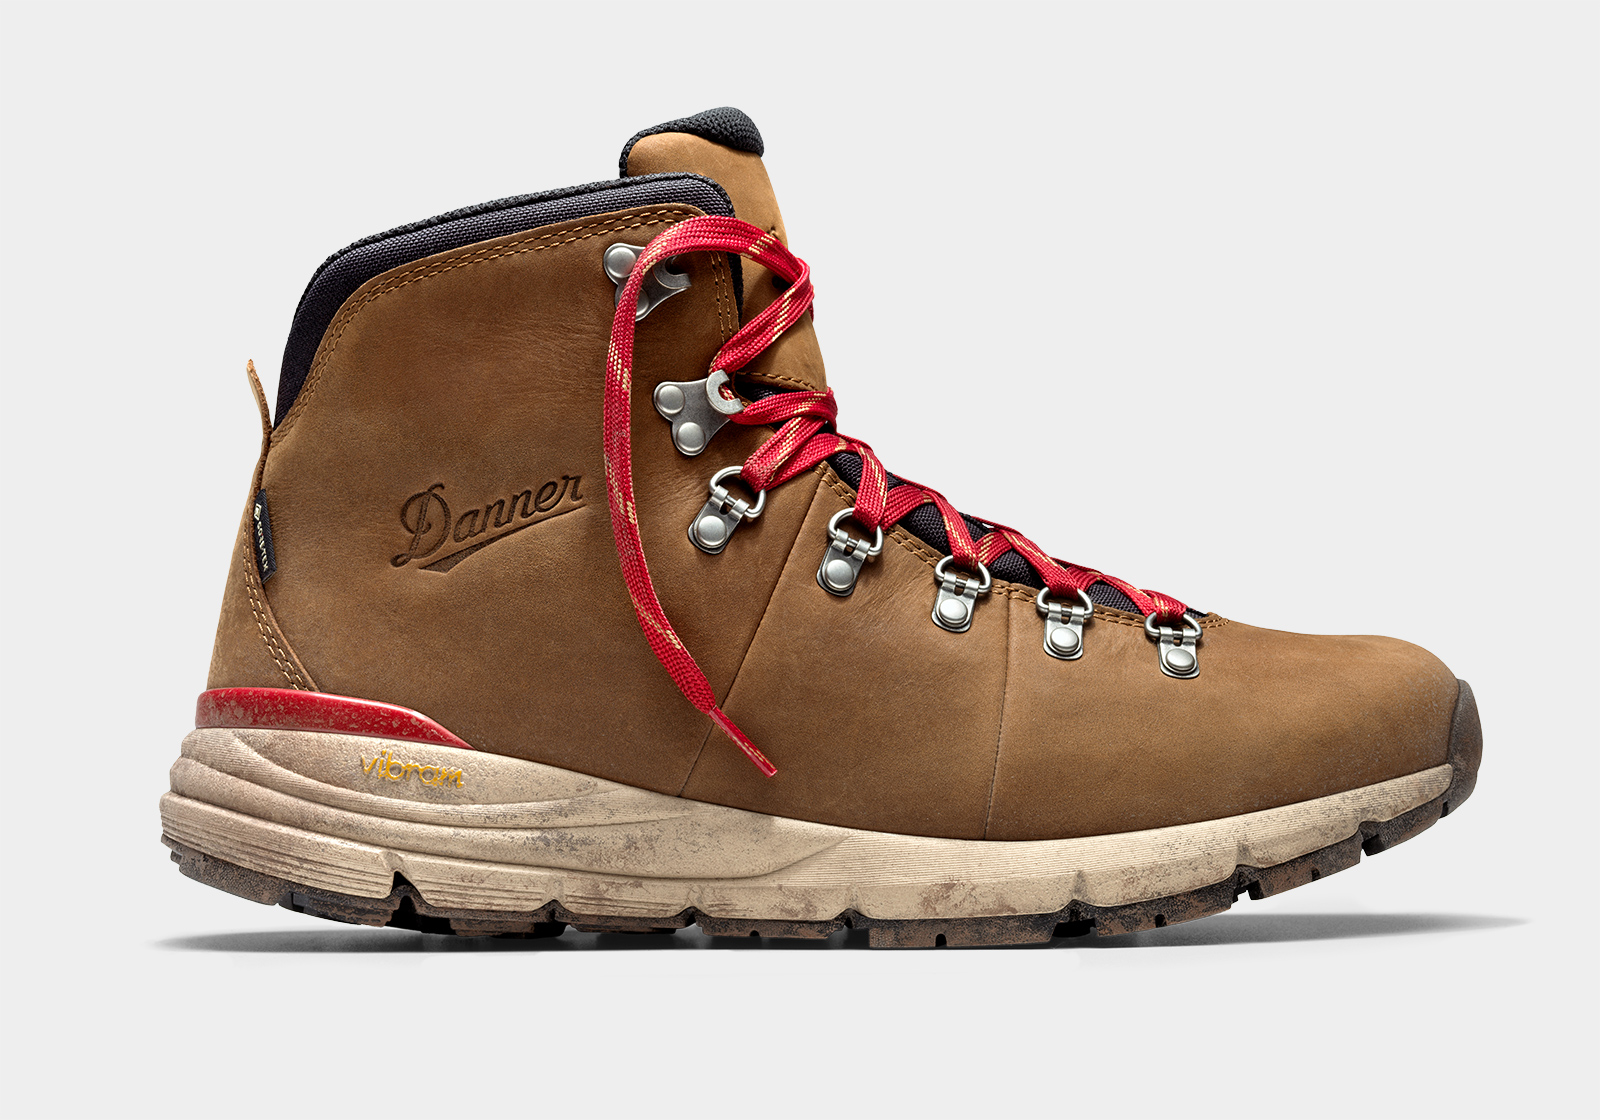 Danner Mountain 600 Leaf GTX, Now Recraftable | Review | Field Mag